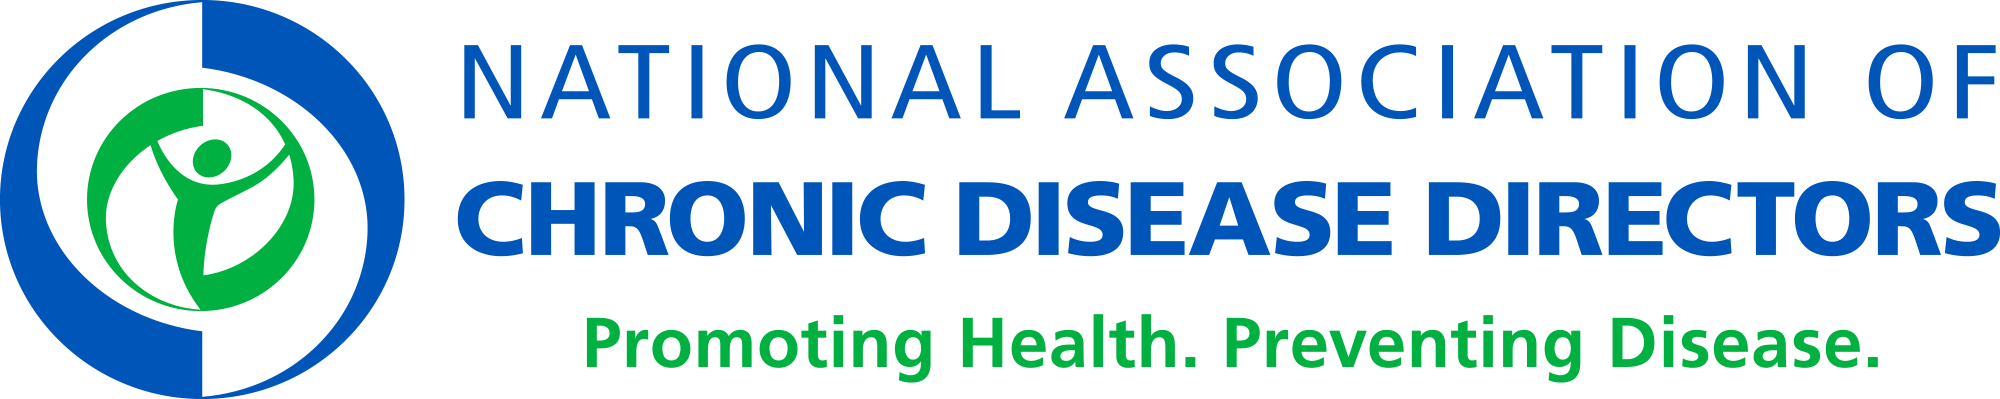 The National Association of Chronic Disease Directors